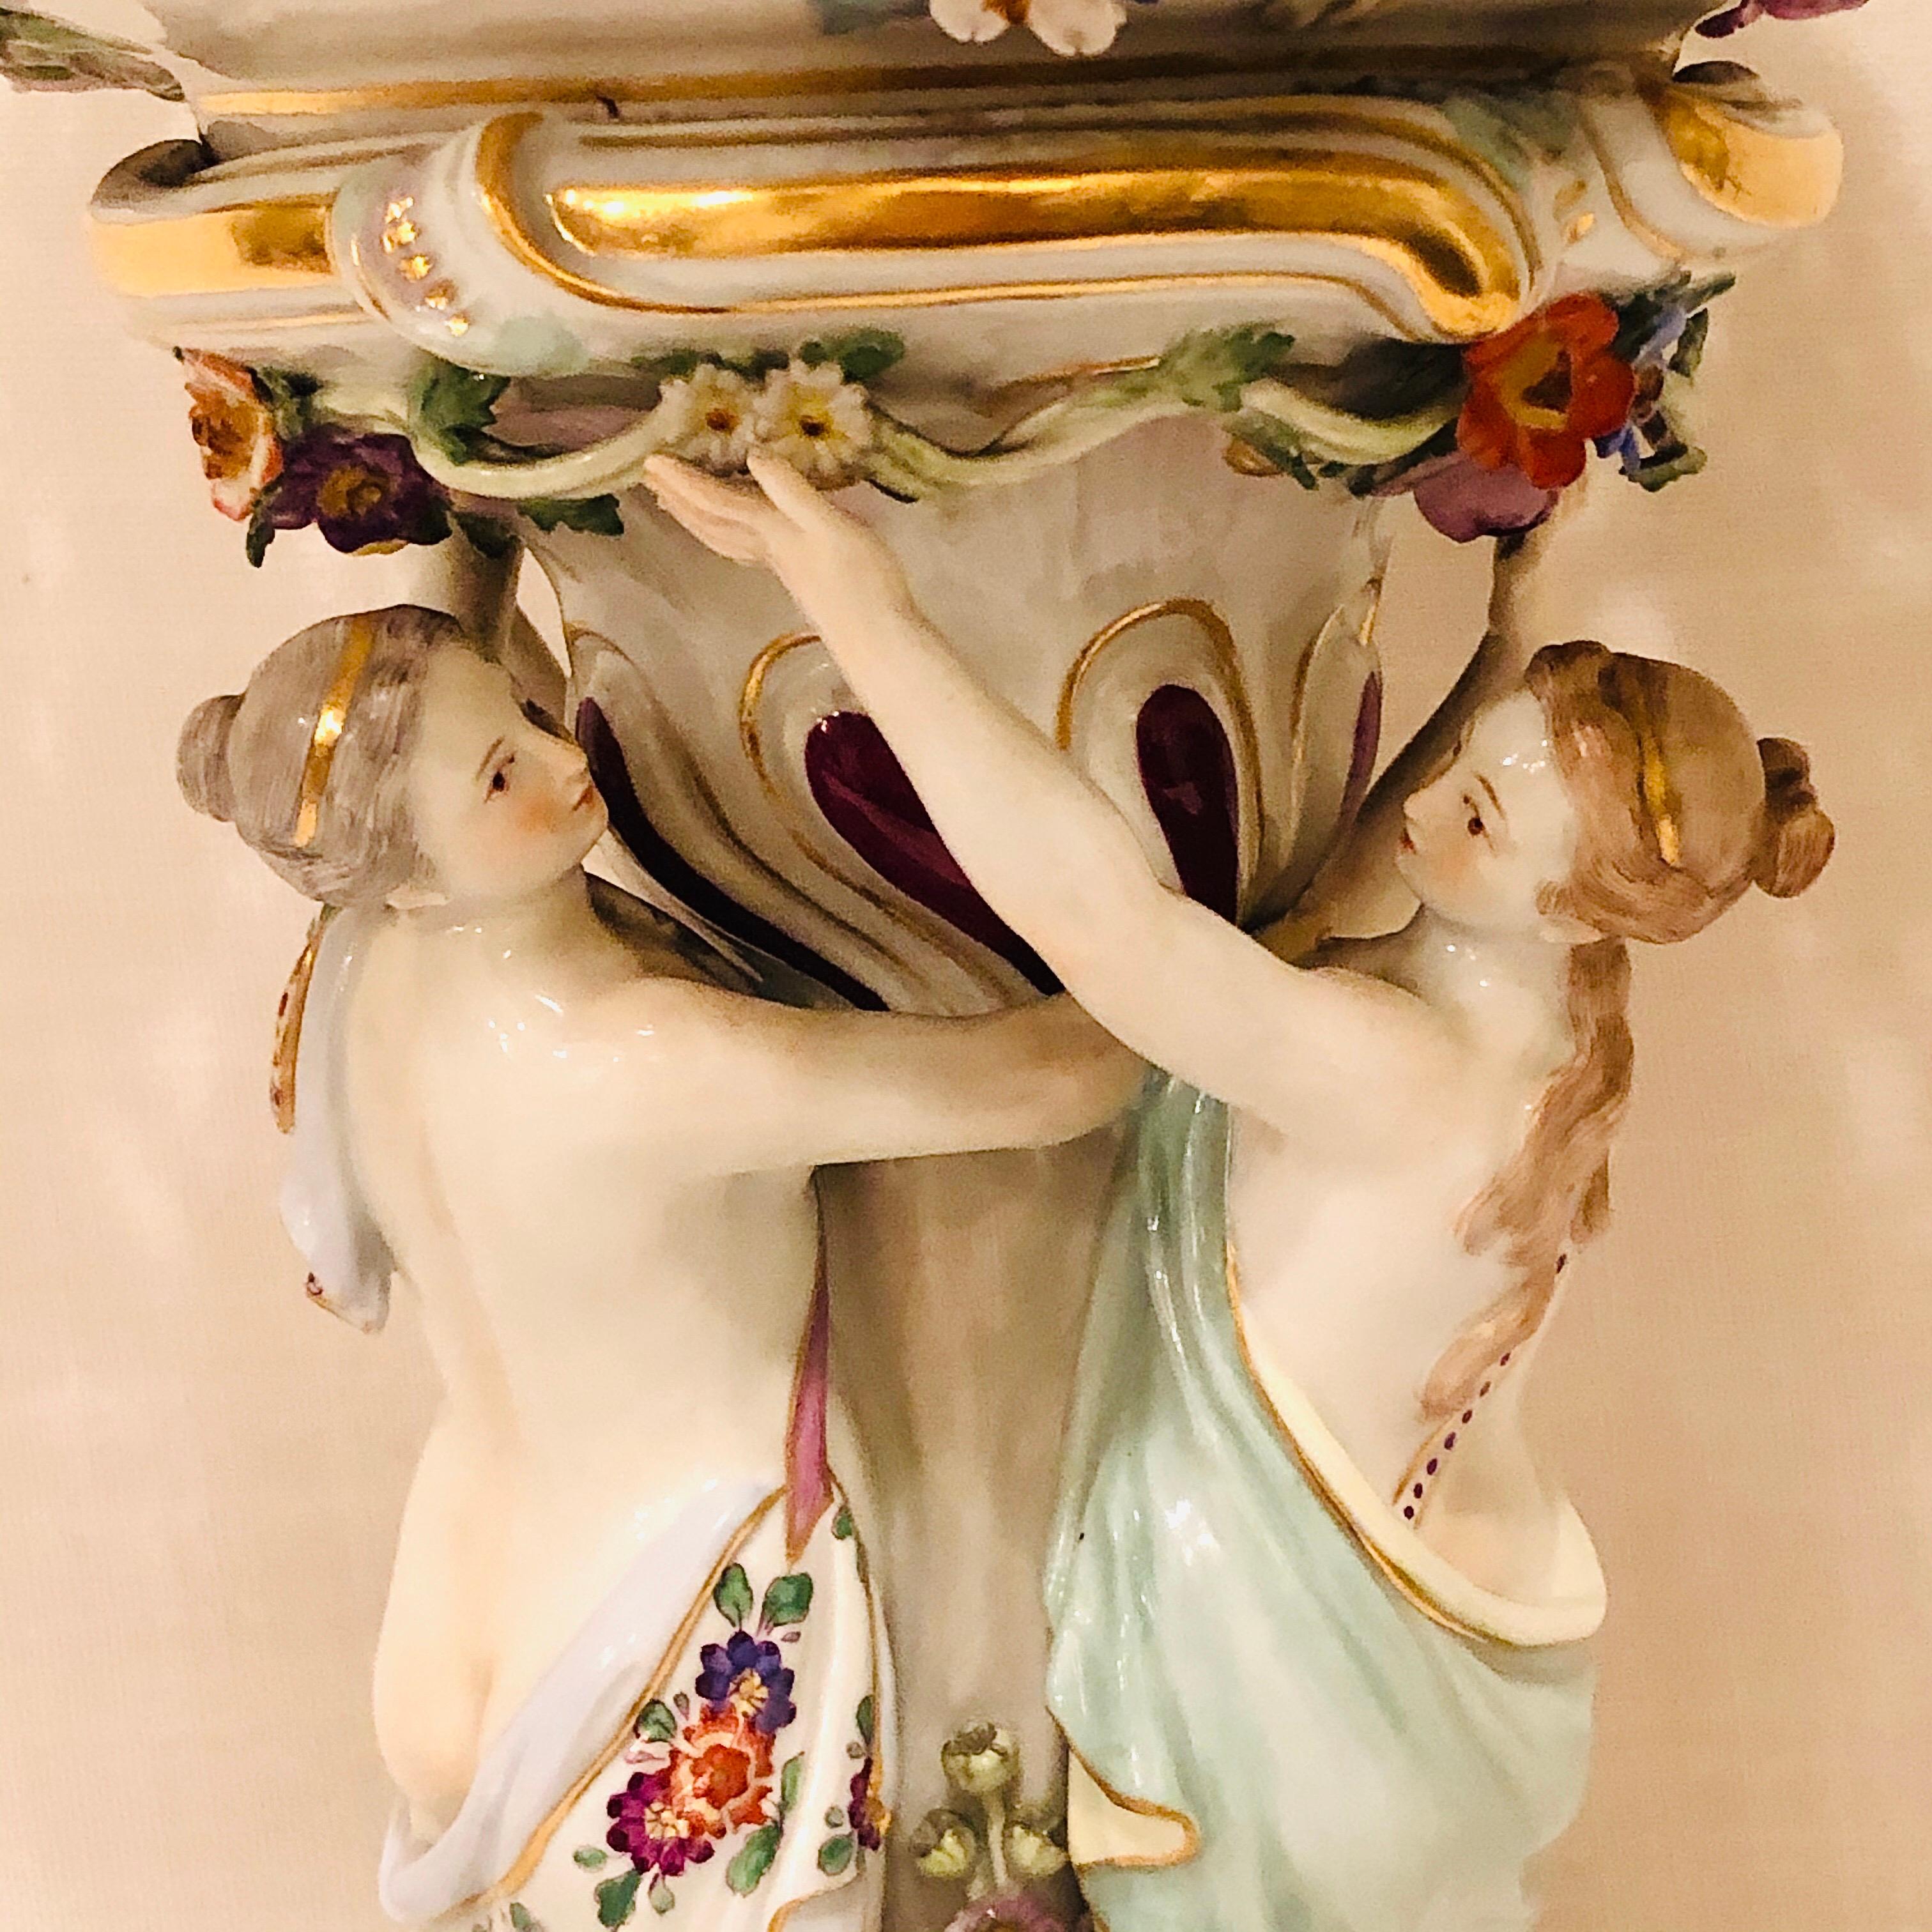 Meissen centerpiece of the three graces or charities dancing in a circle. These three graces are from Greek mythology and they represent charm, beauty, nature, good will, fertility and human creativity. These beautiful ladies are eternally young and